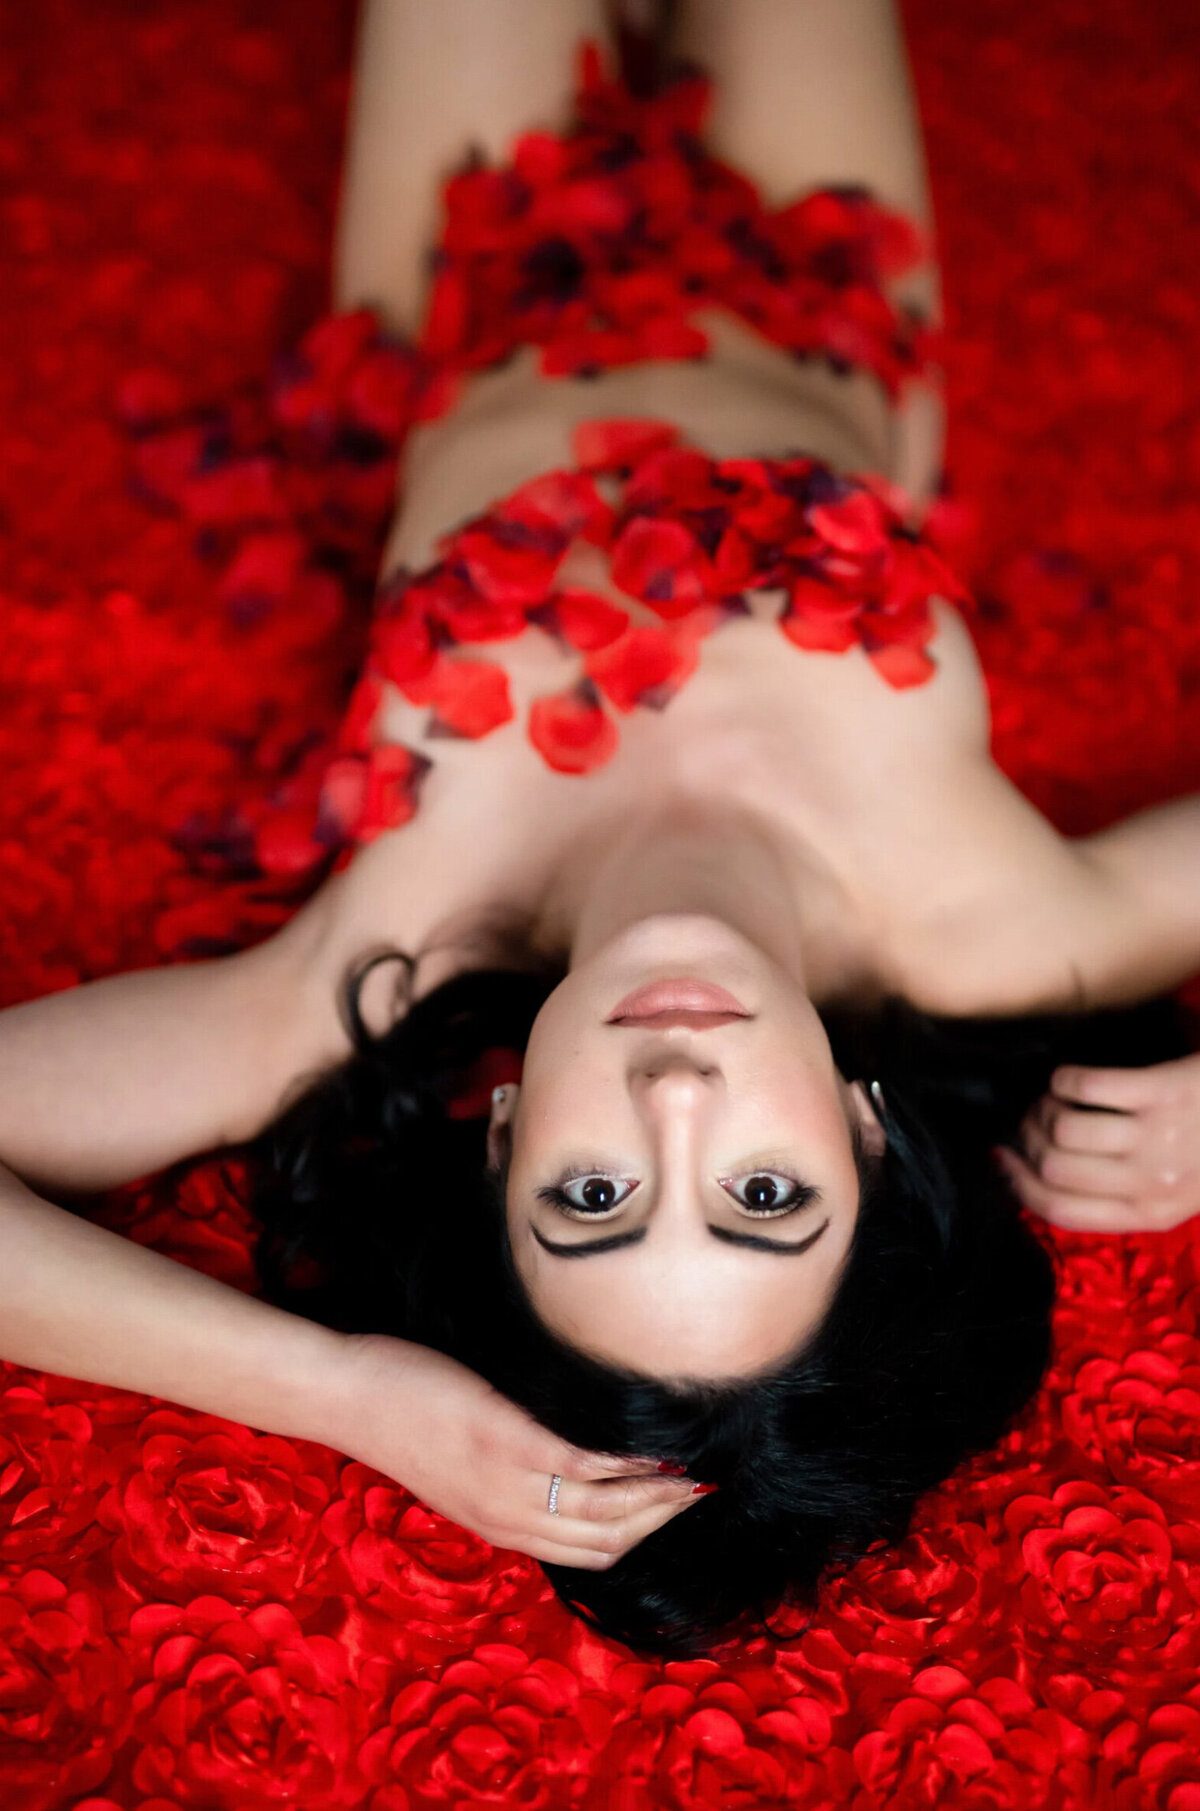 Woman covered in red rose, petals posing for a boudoir photo shoot